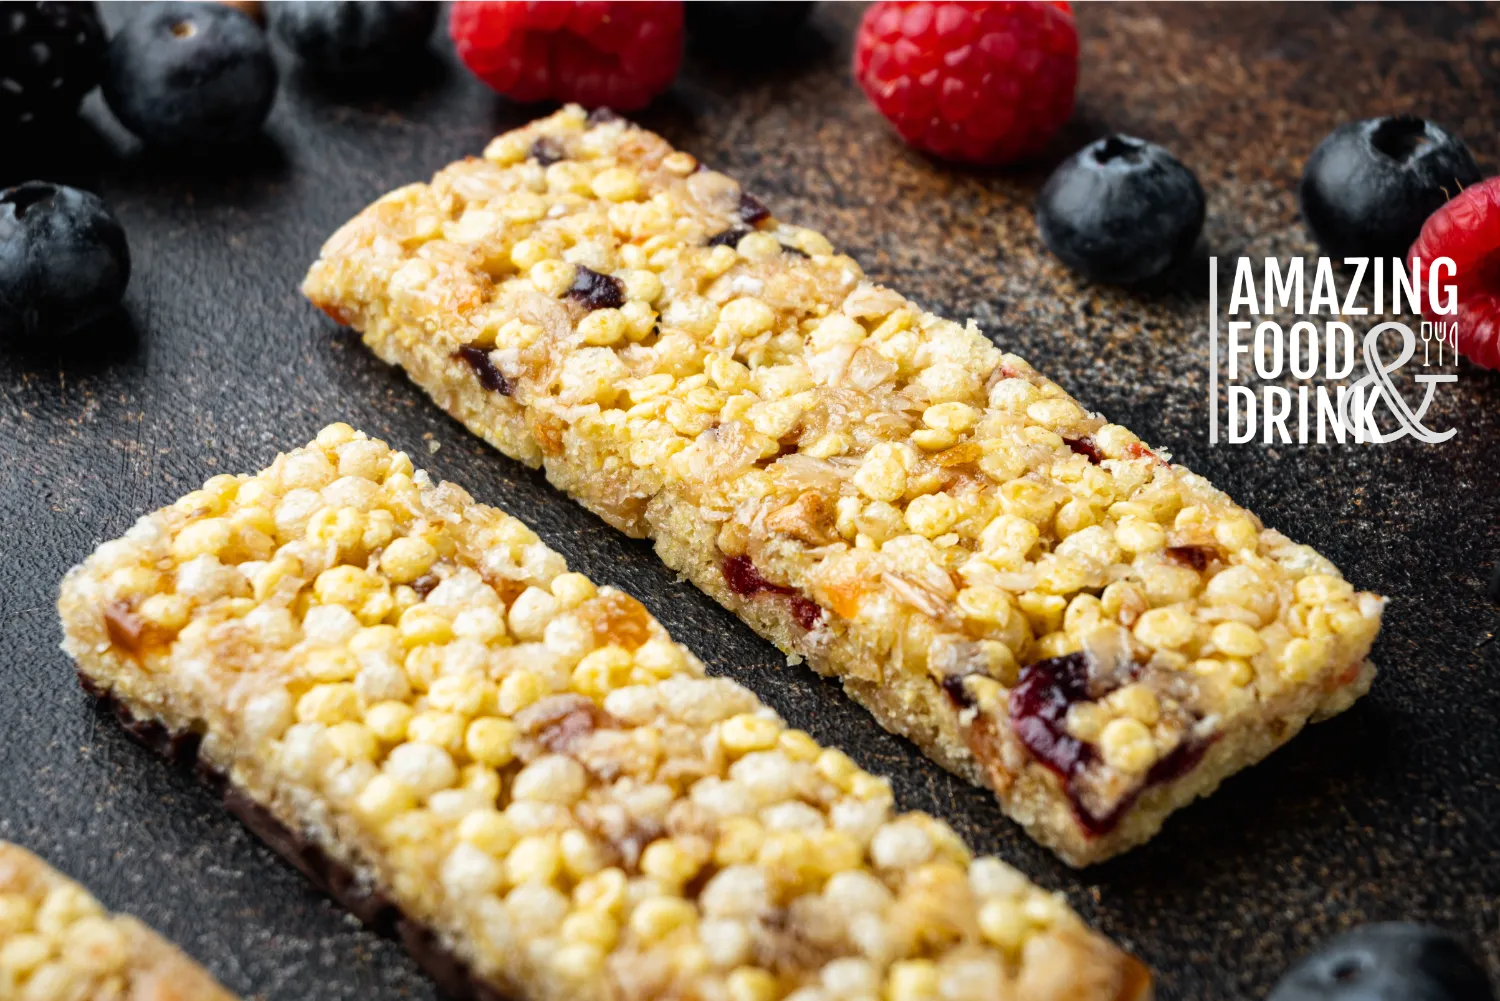 14 Best Nut-Free and Vegan Energy Bars and Protein Bars on the Market